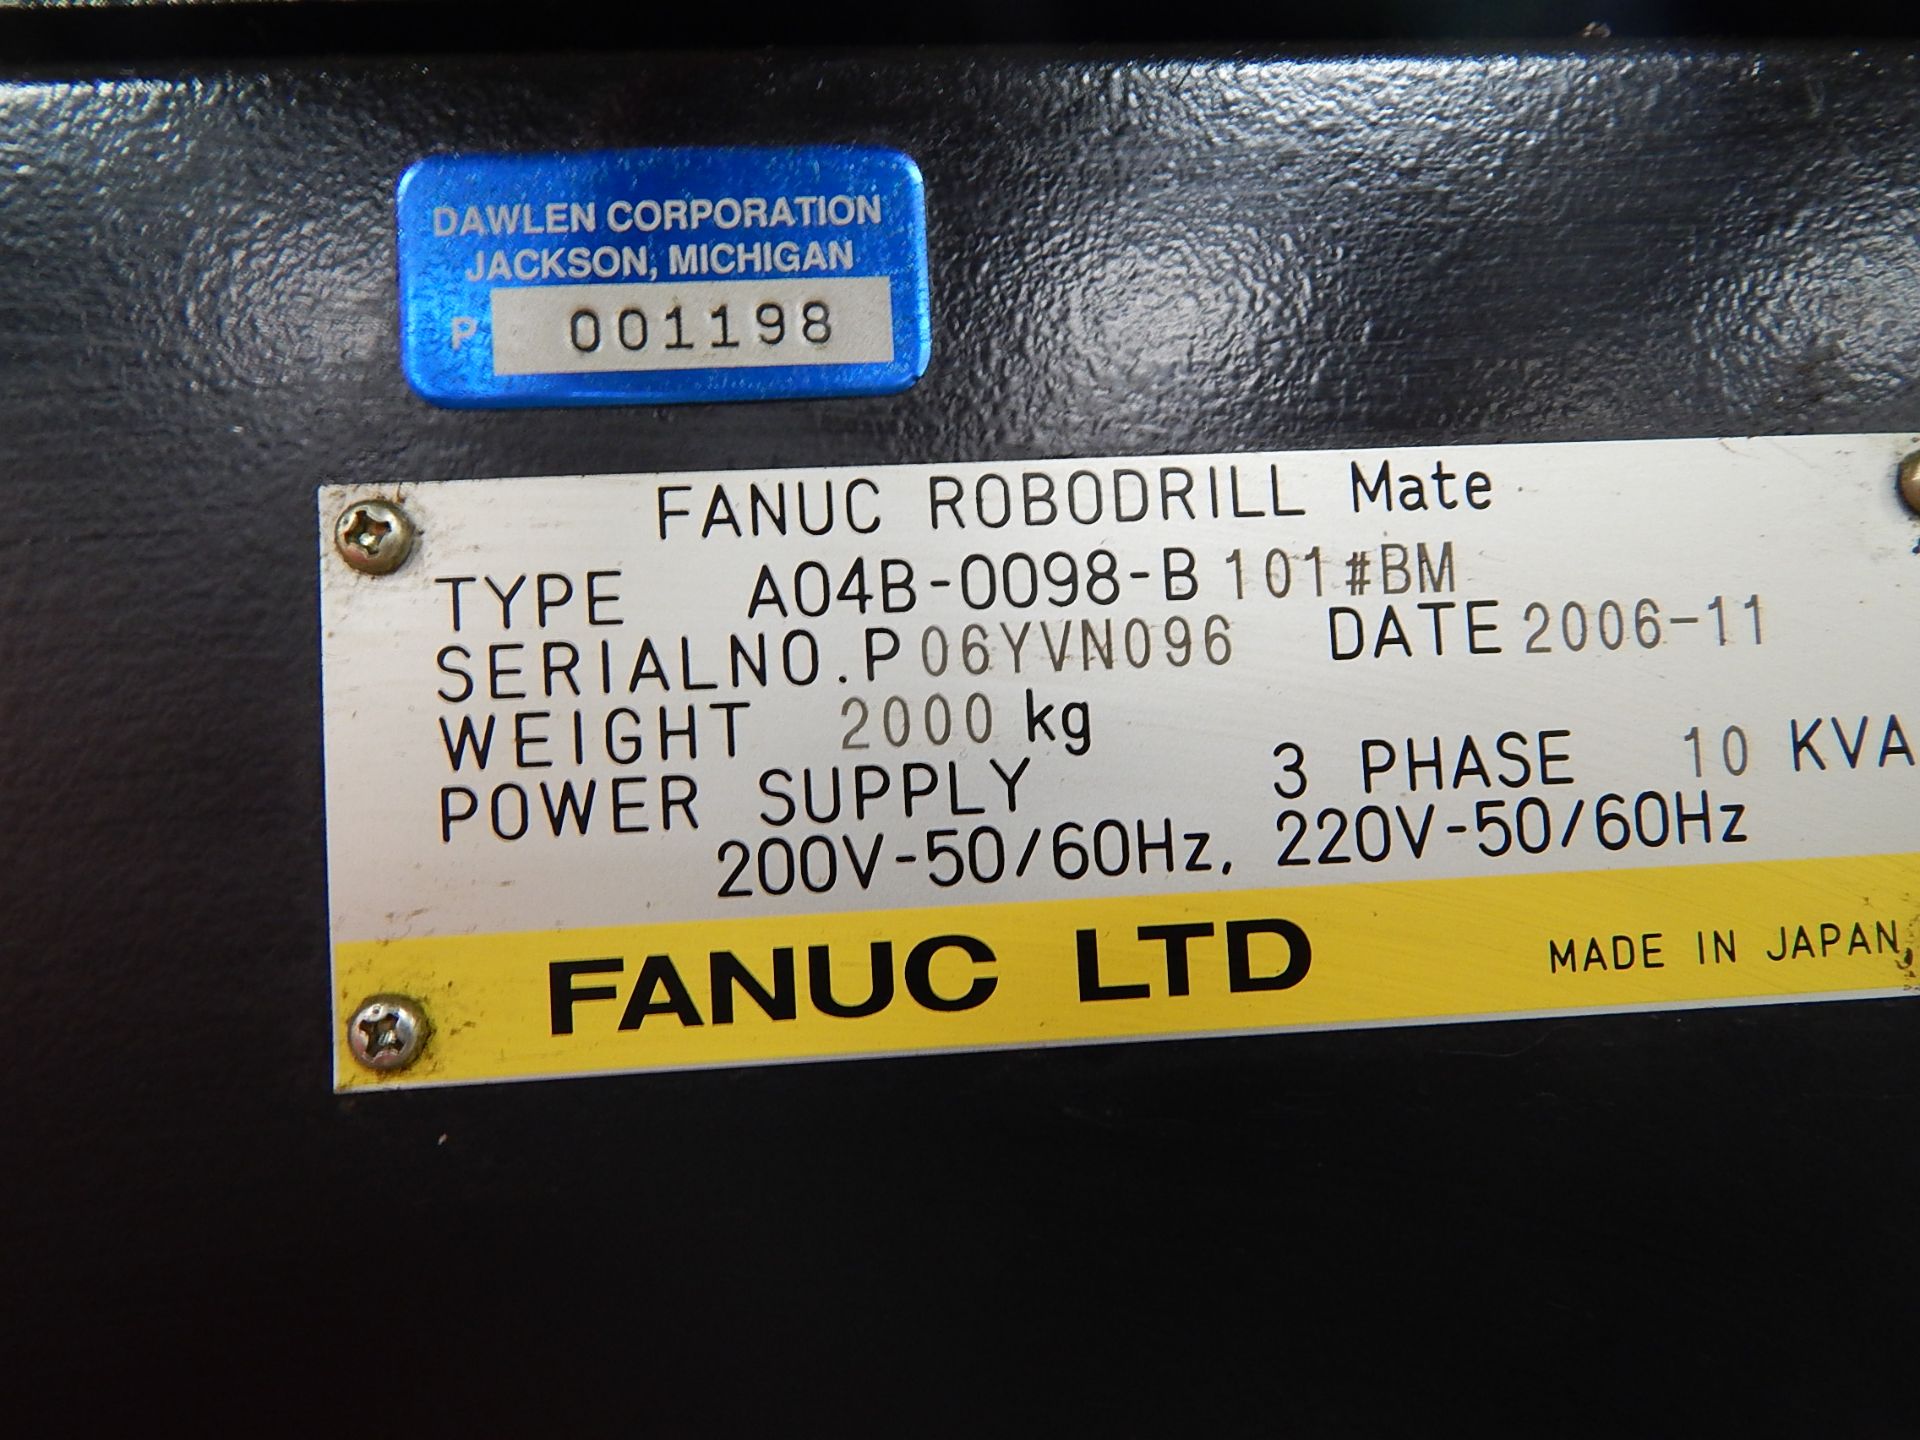 Fanuc Robodrill Mate CNC Drilling and Tapping Machine, s/n P06YN096, New 2006, Fanuc 0-MC CNC - Image 8 of 8